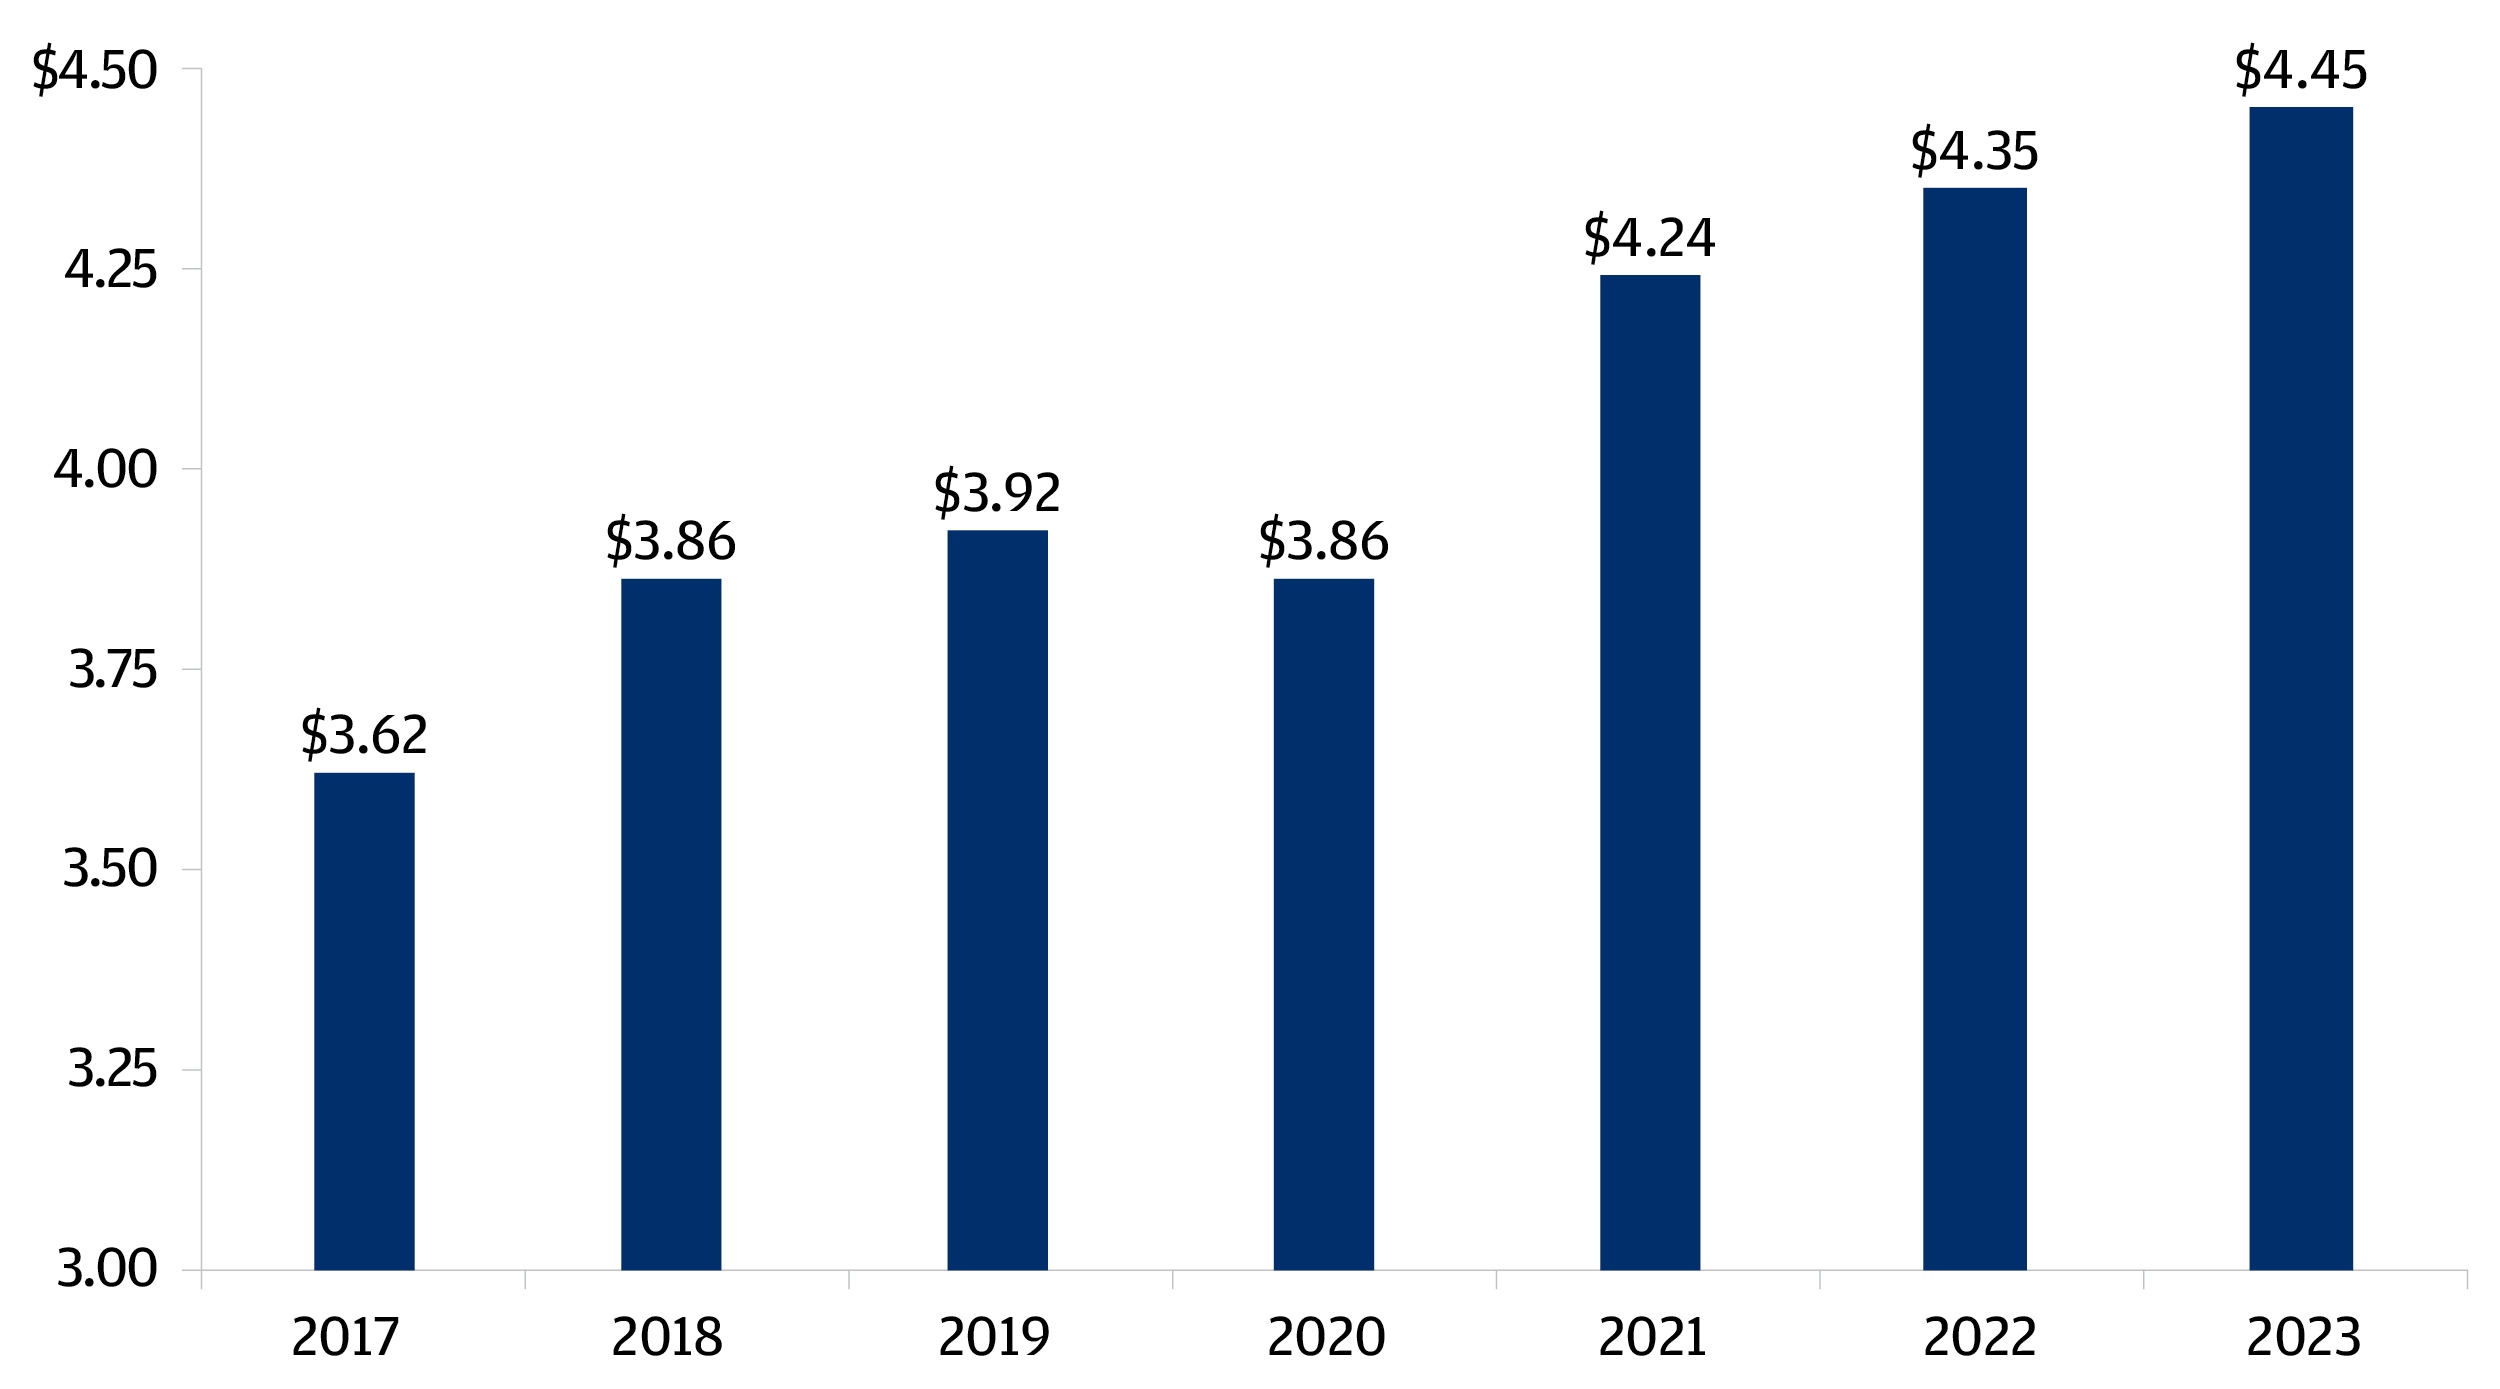 This chart shows the total average dollar cost of one data breach for a company from 2017 to 2023, in millions of U.S. dollars